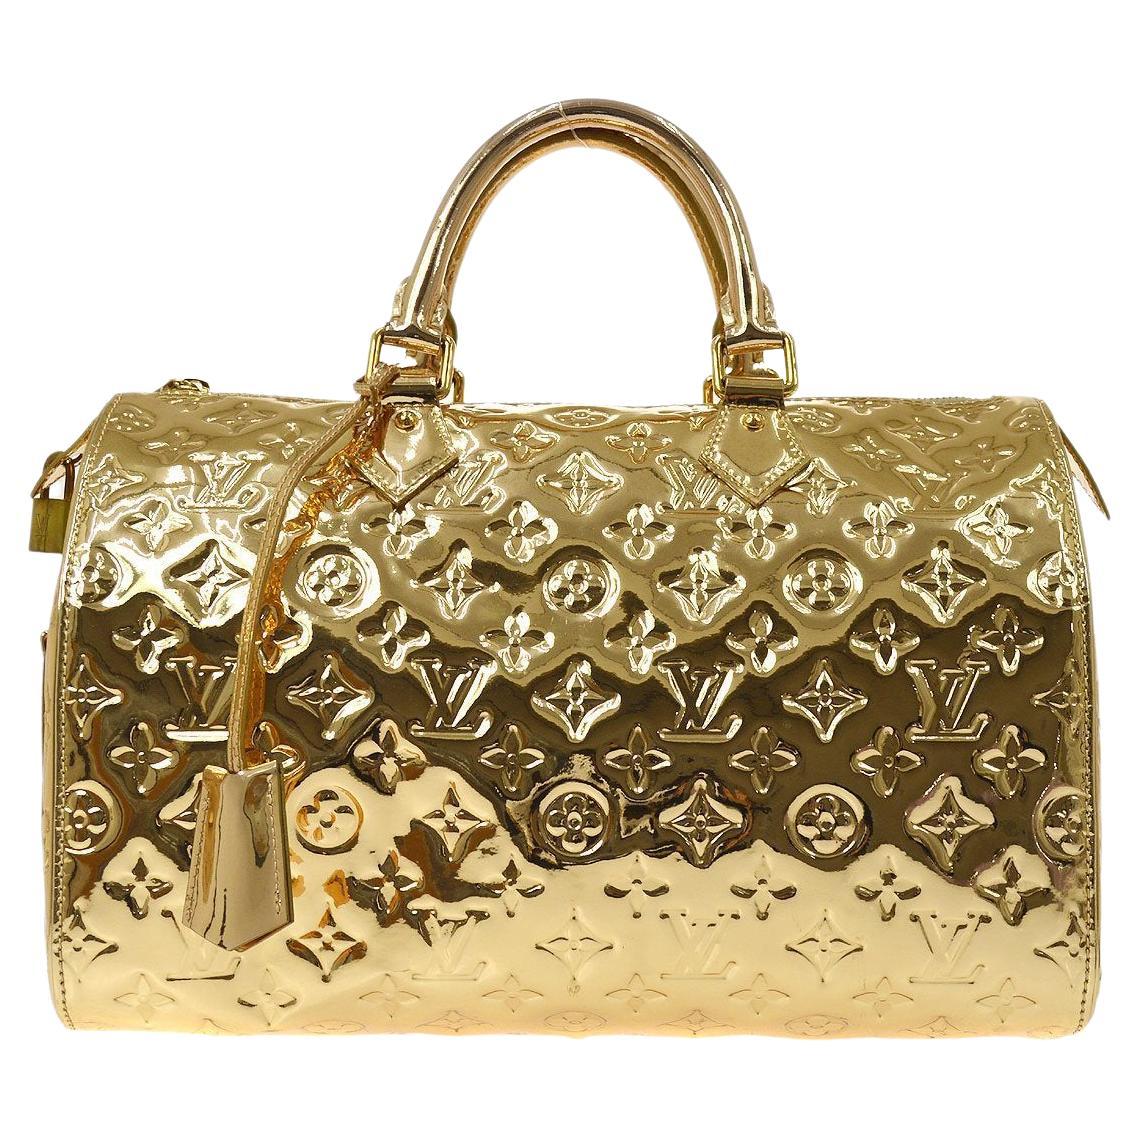 Sold at Auction: Louis Vuitton Gold Mirror Patent Leather Speedy 30